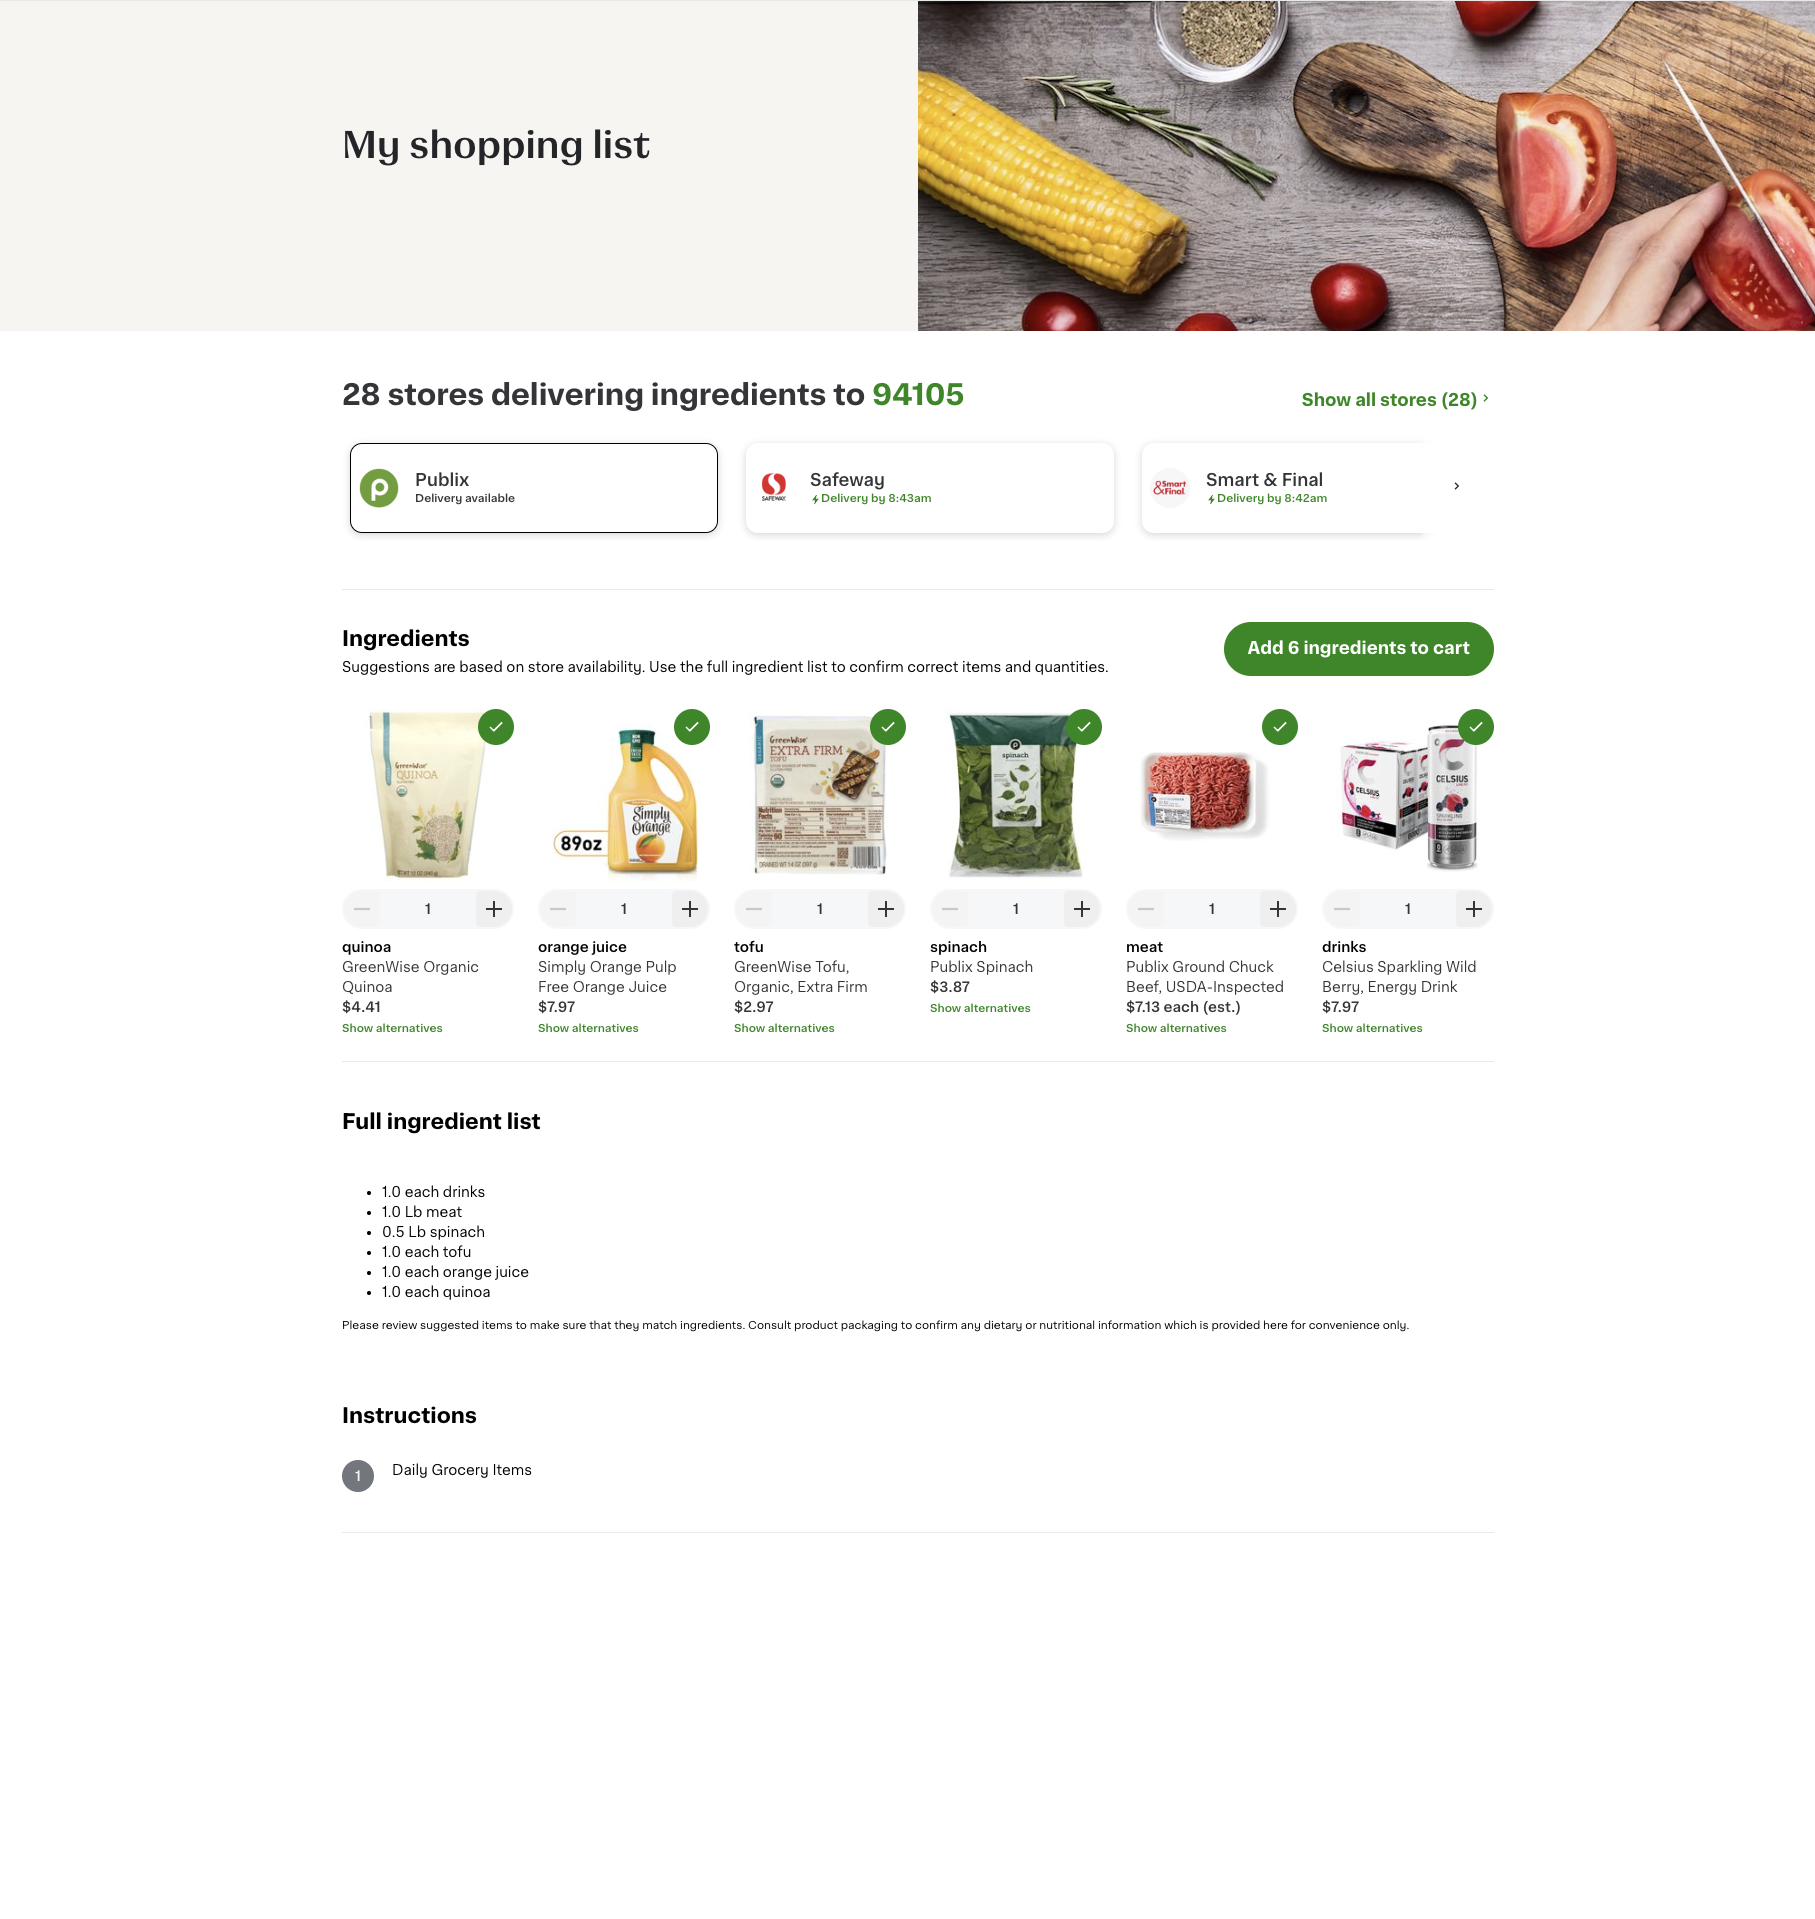 Shows a shopping list page with a list of shoppable items.